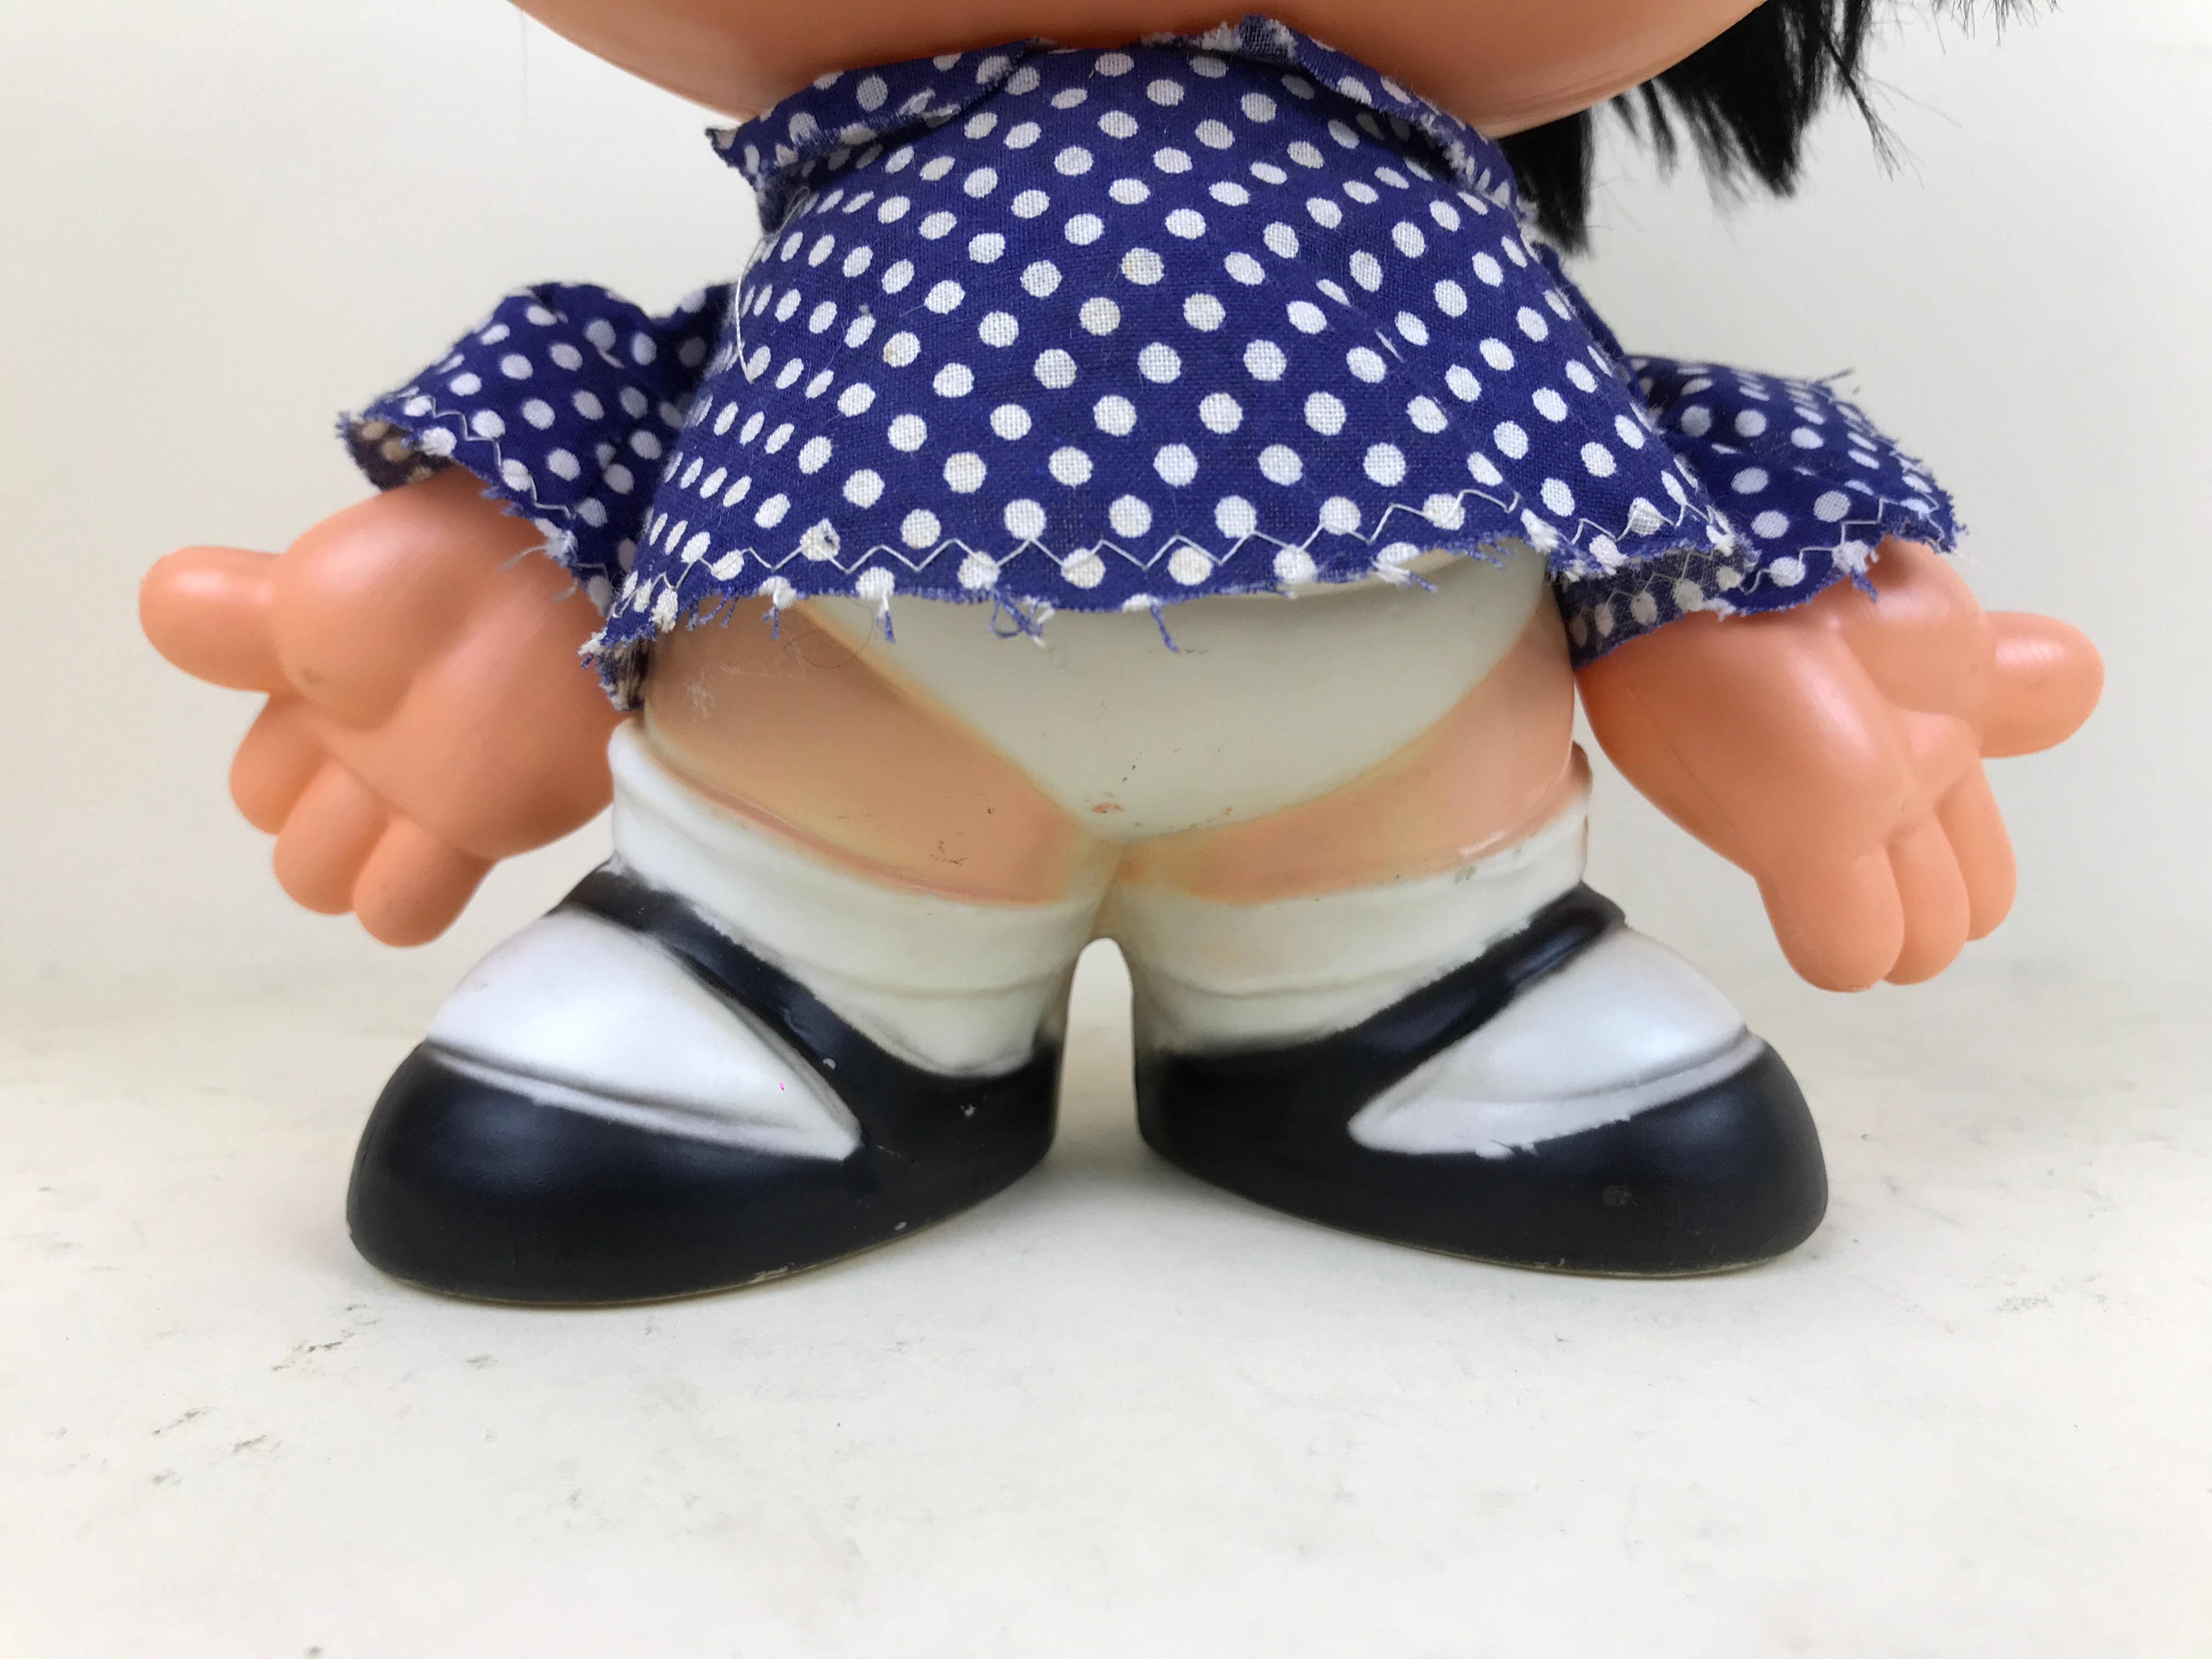 Italian 1960s Vintage Collectible Mafalda Doll Made in Italy for Sperlari Candy Maker For Sale